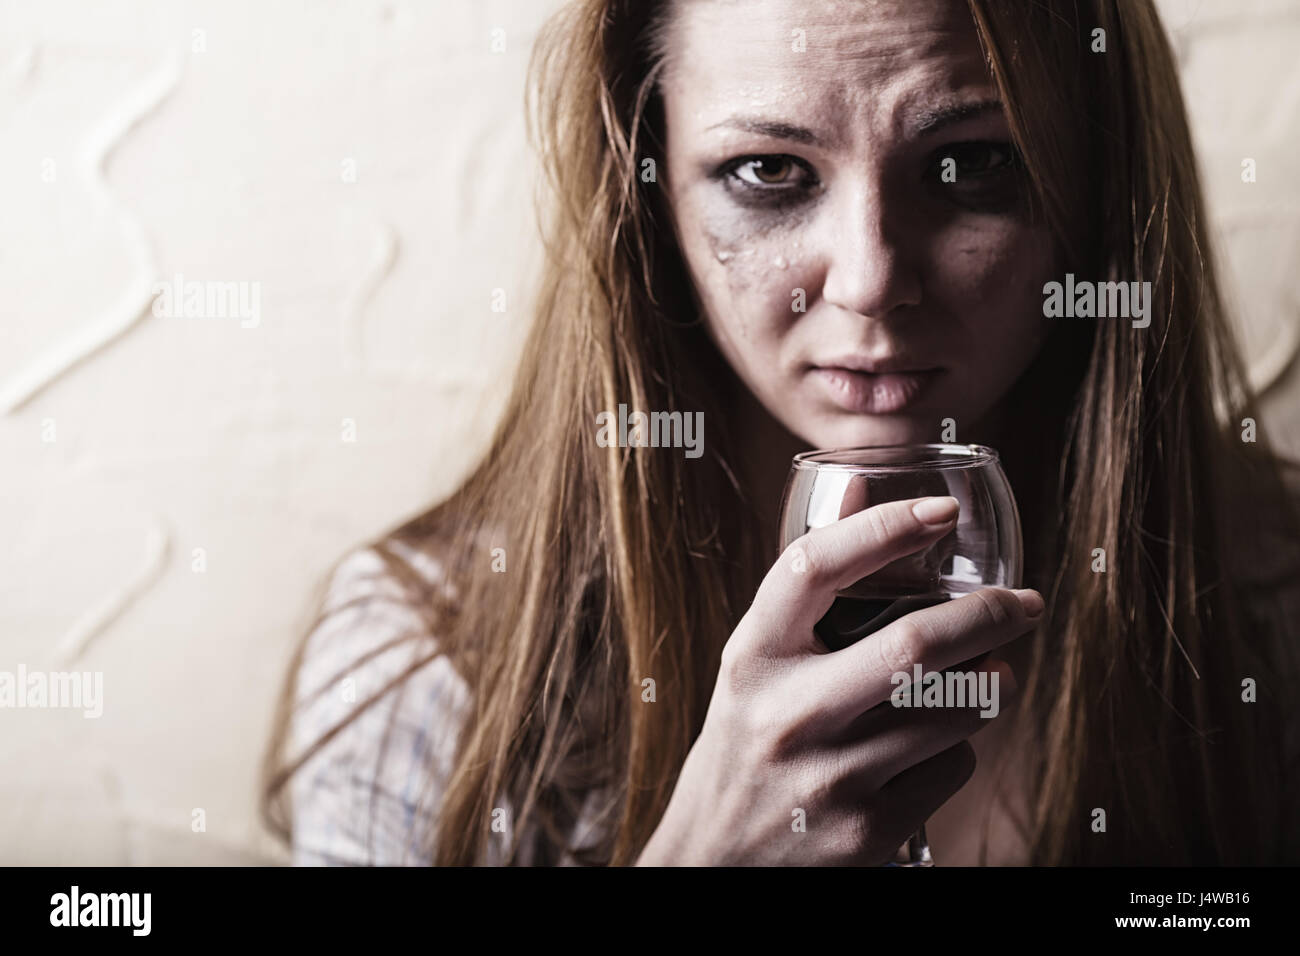 Young crying woman with a glass of wine Stock Photo